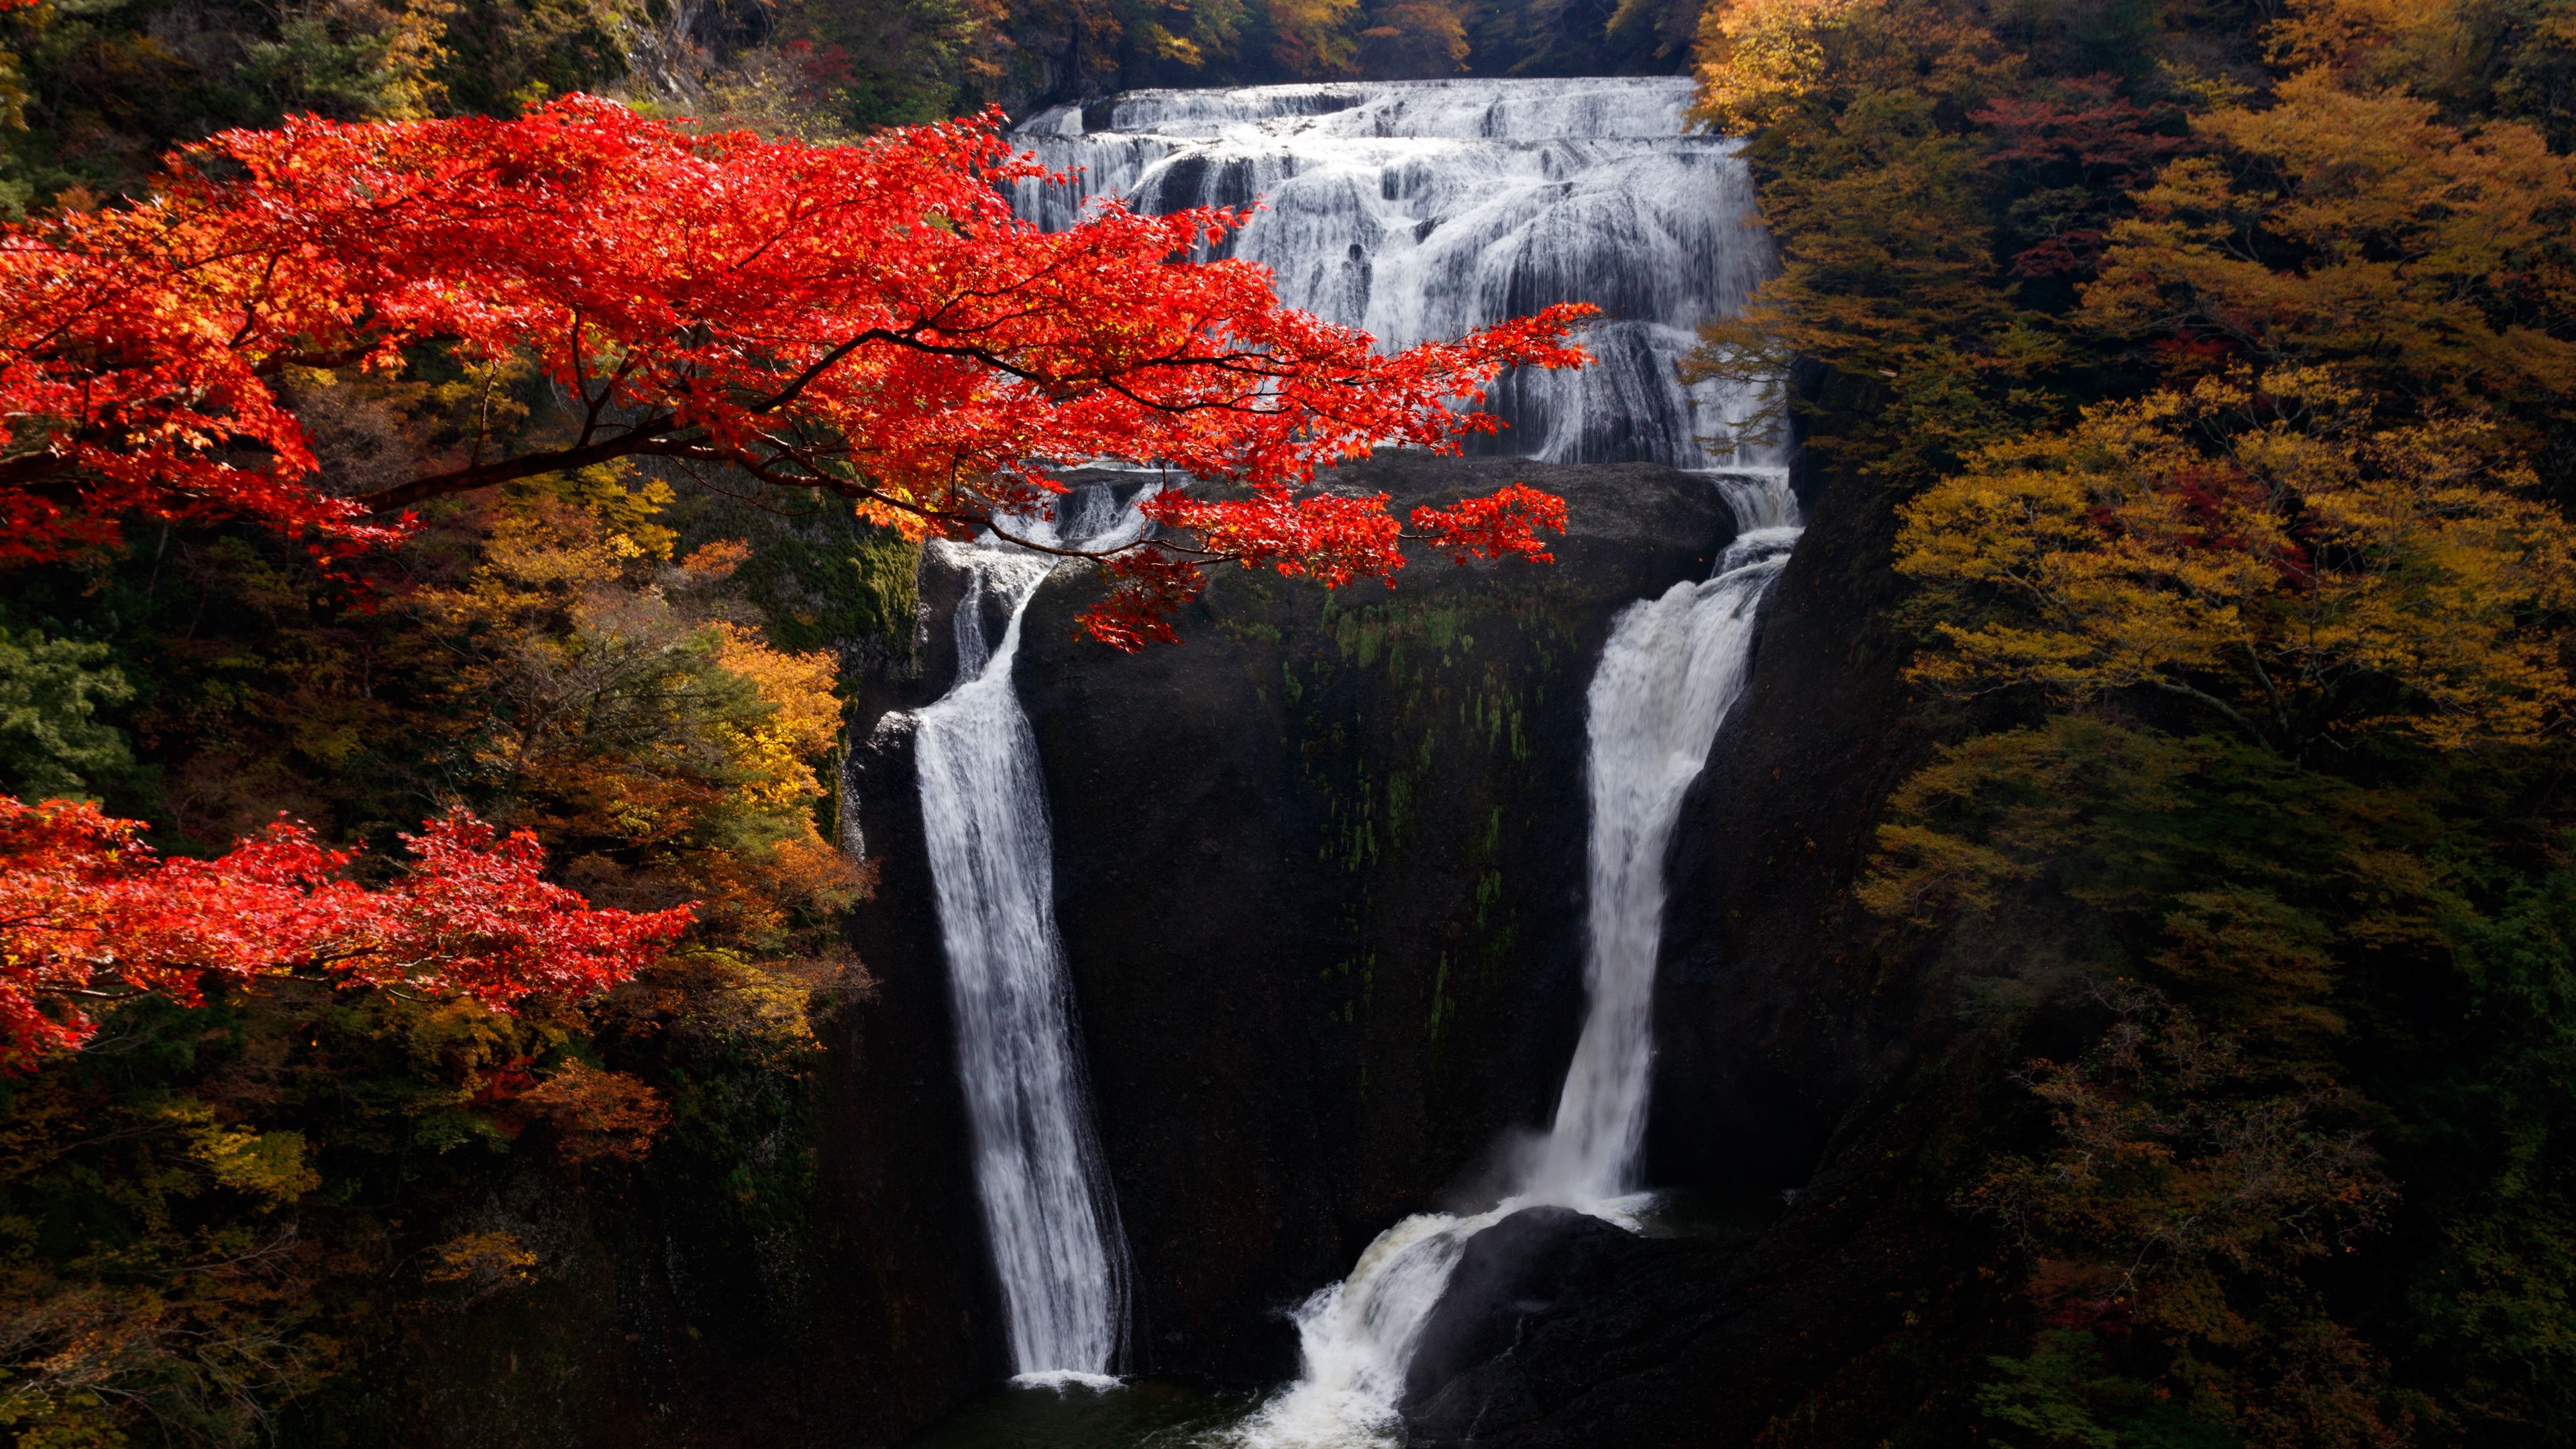 Download wallpaper 3840x2160 waterfall, trees, precipice, current, autumn 4k uhd 16:9 HD background